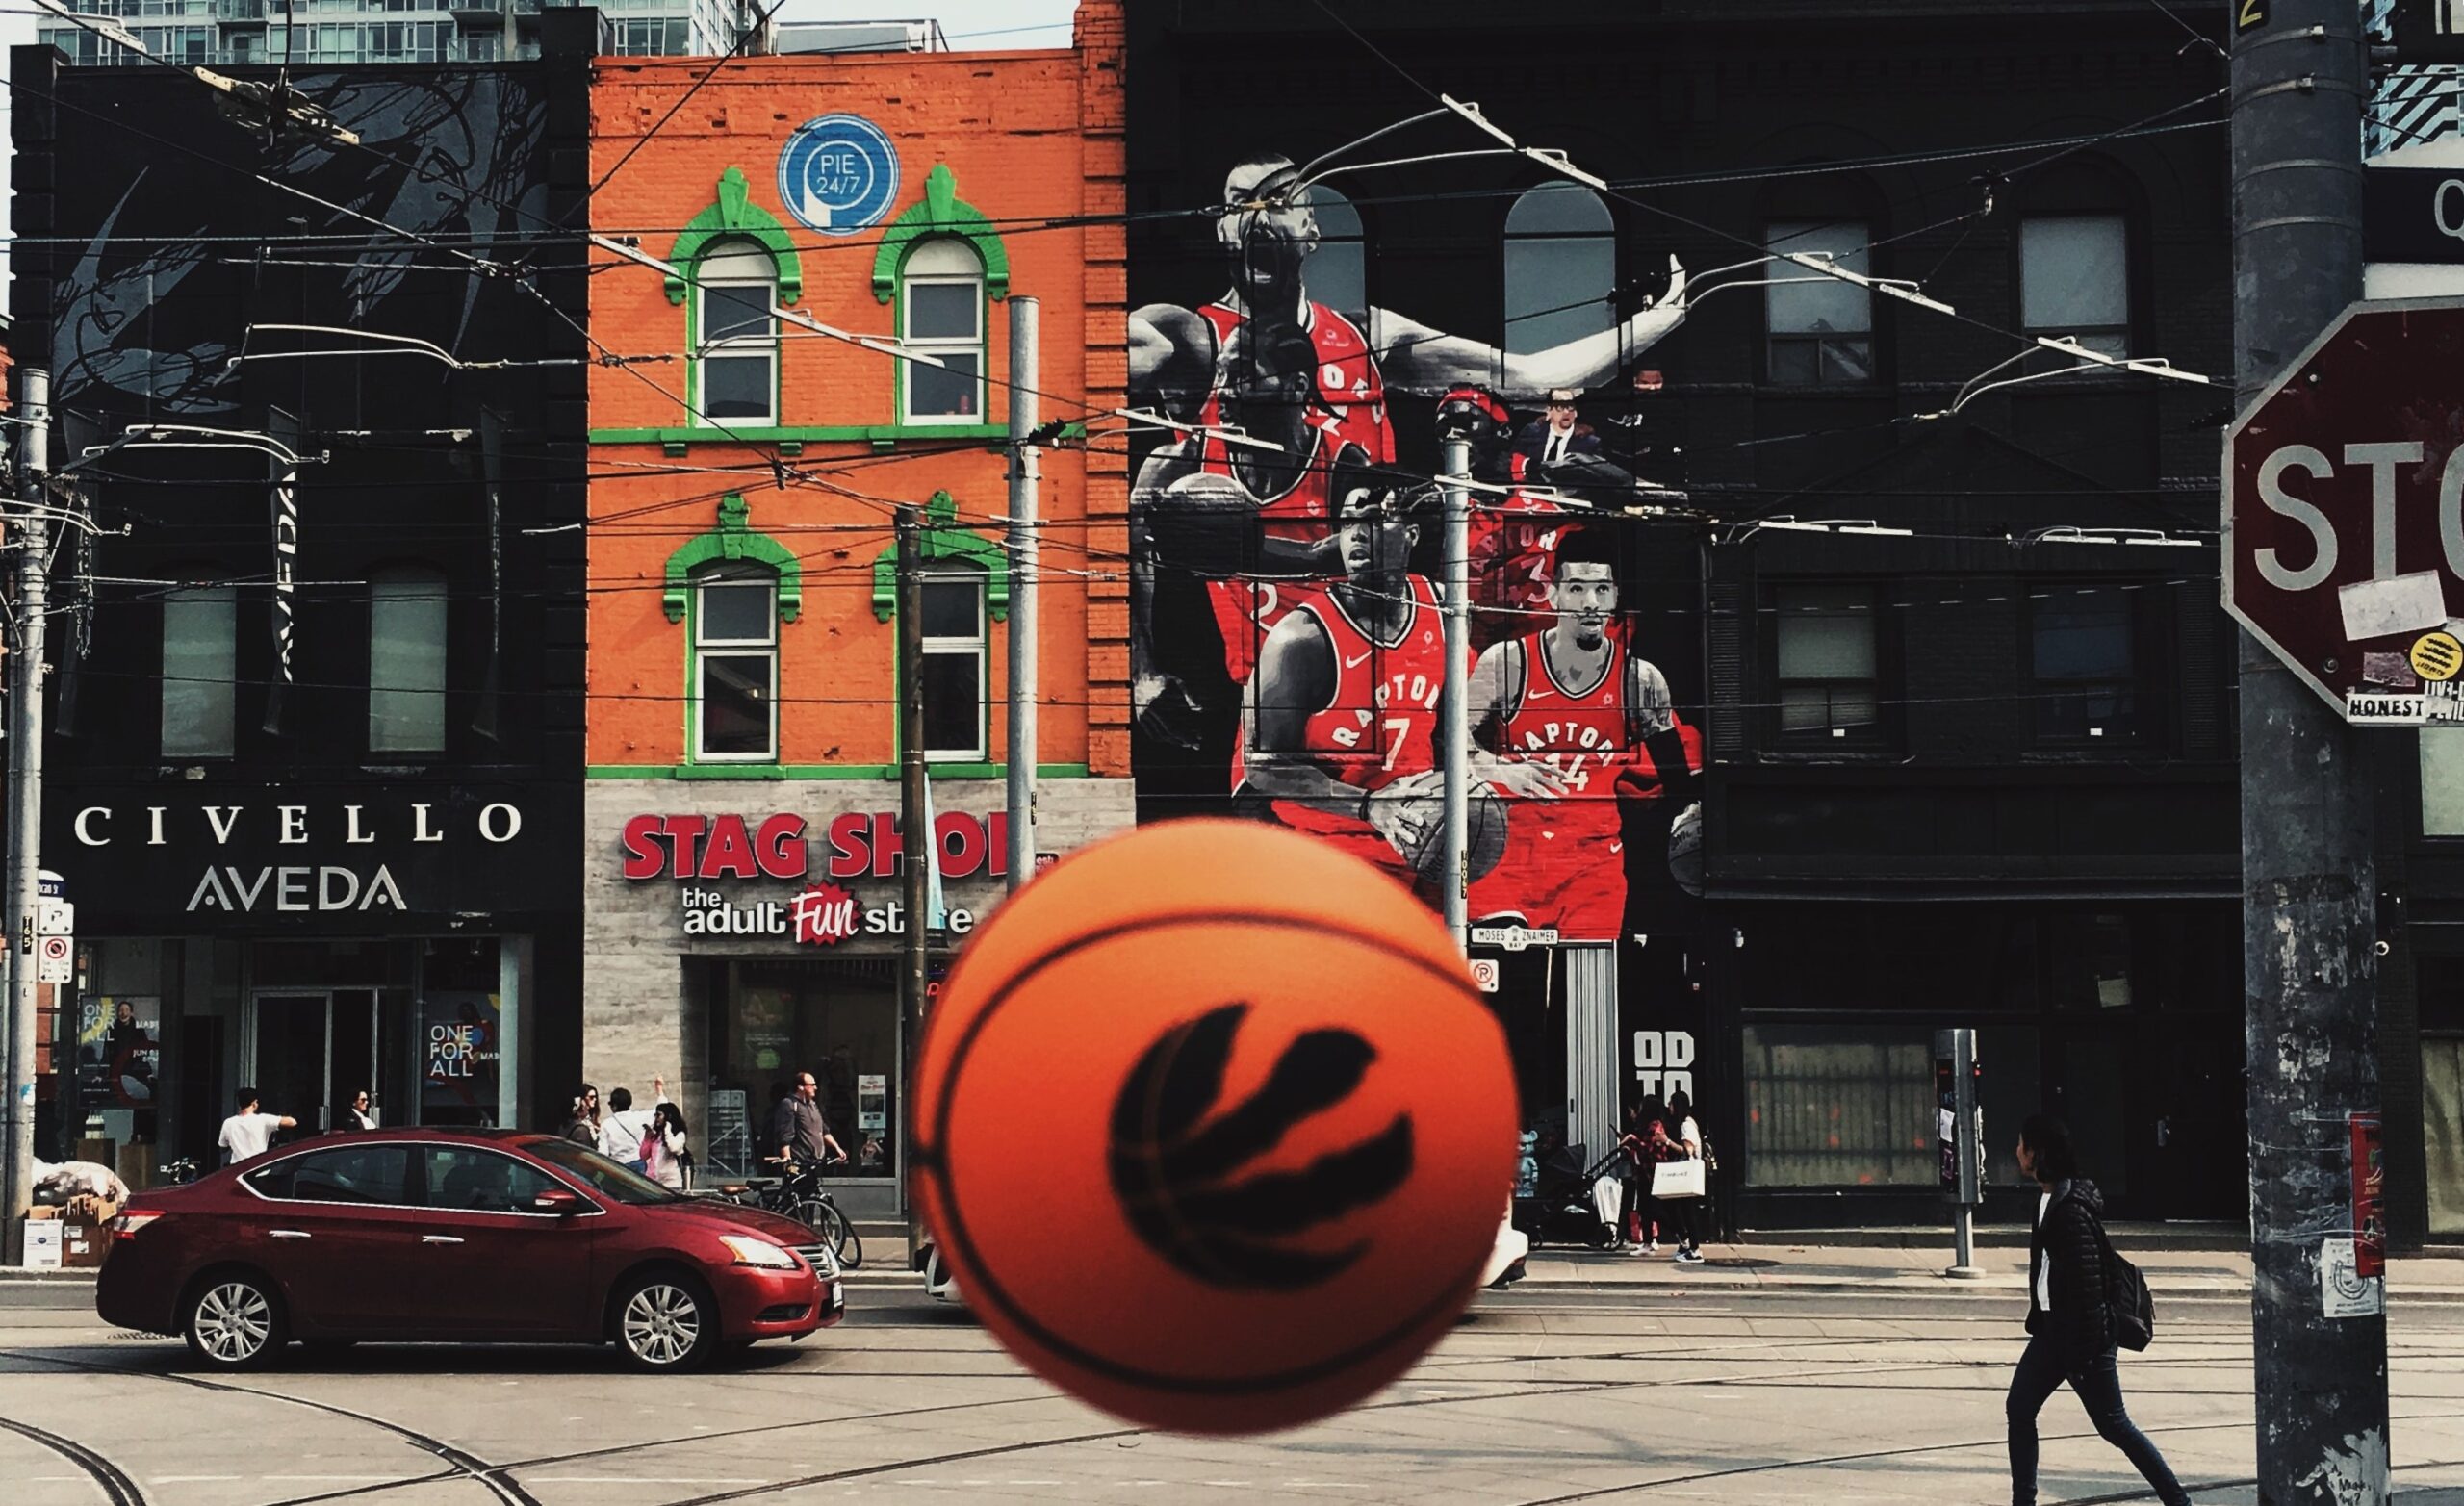 Photo of a basketball in front of buildings in Toronto with Raptors players painted on the exterior wall.